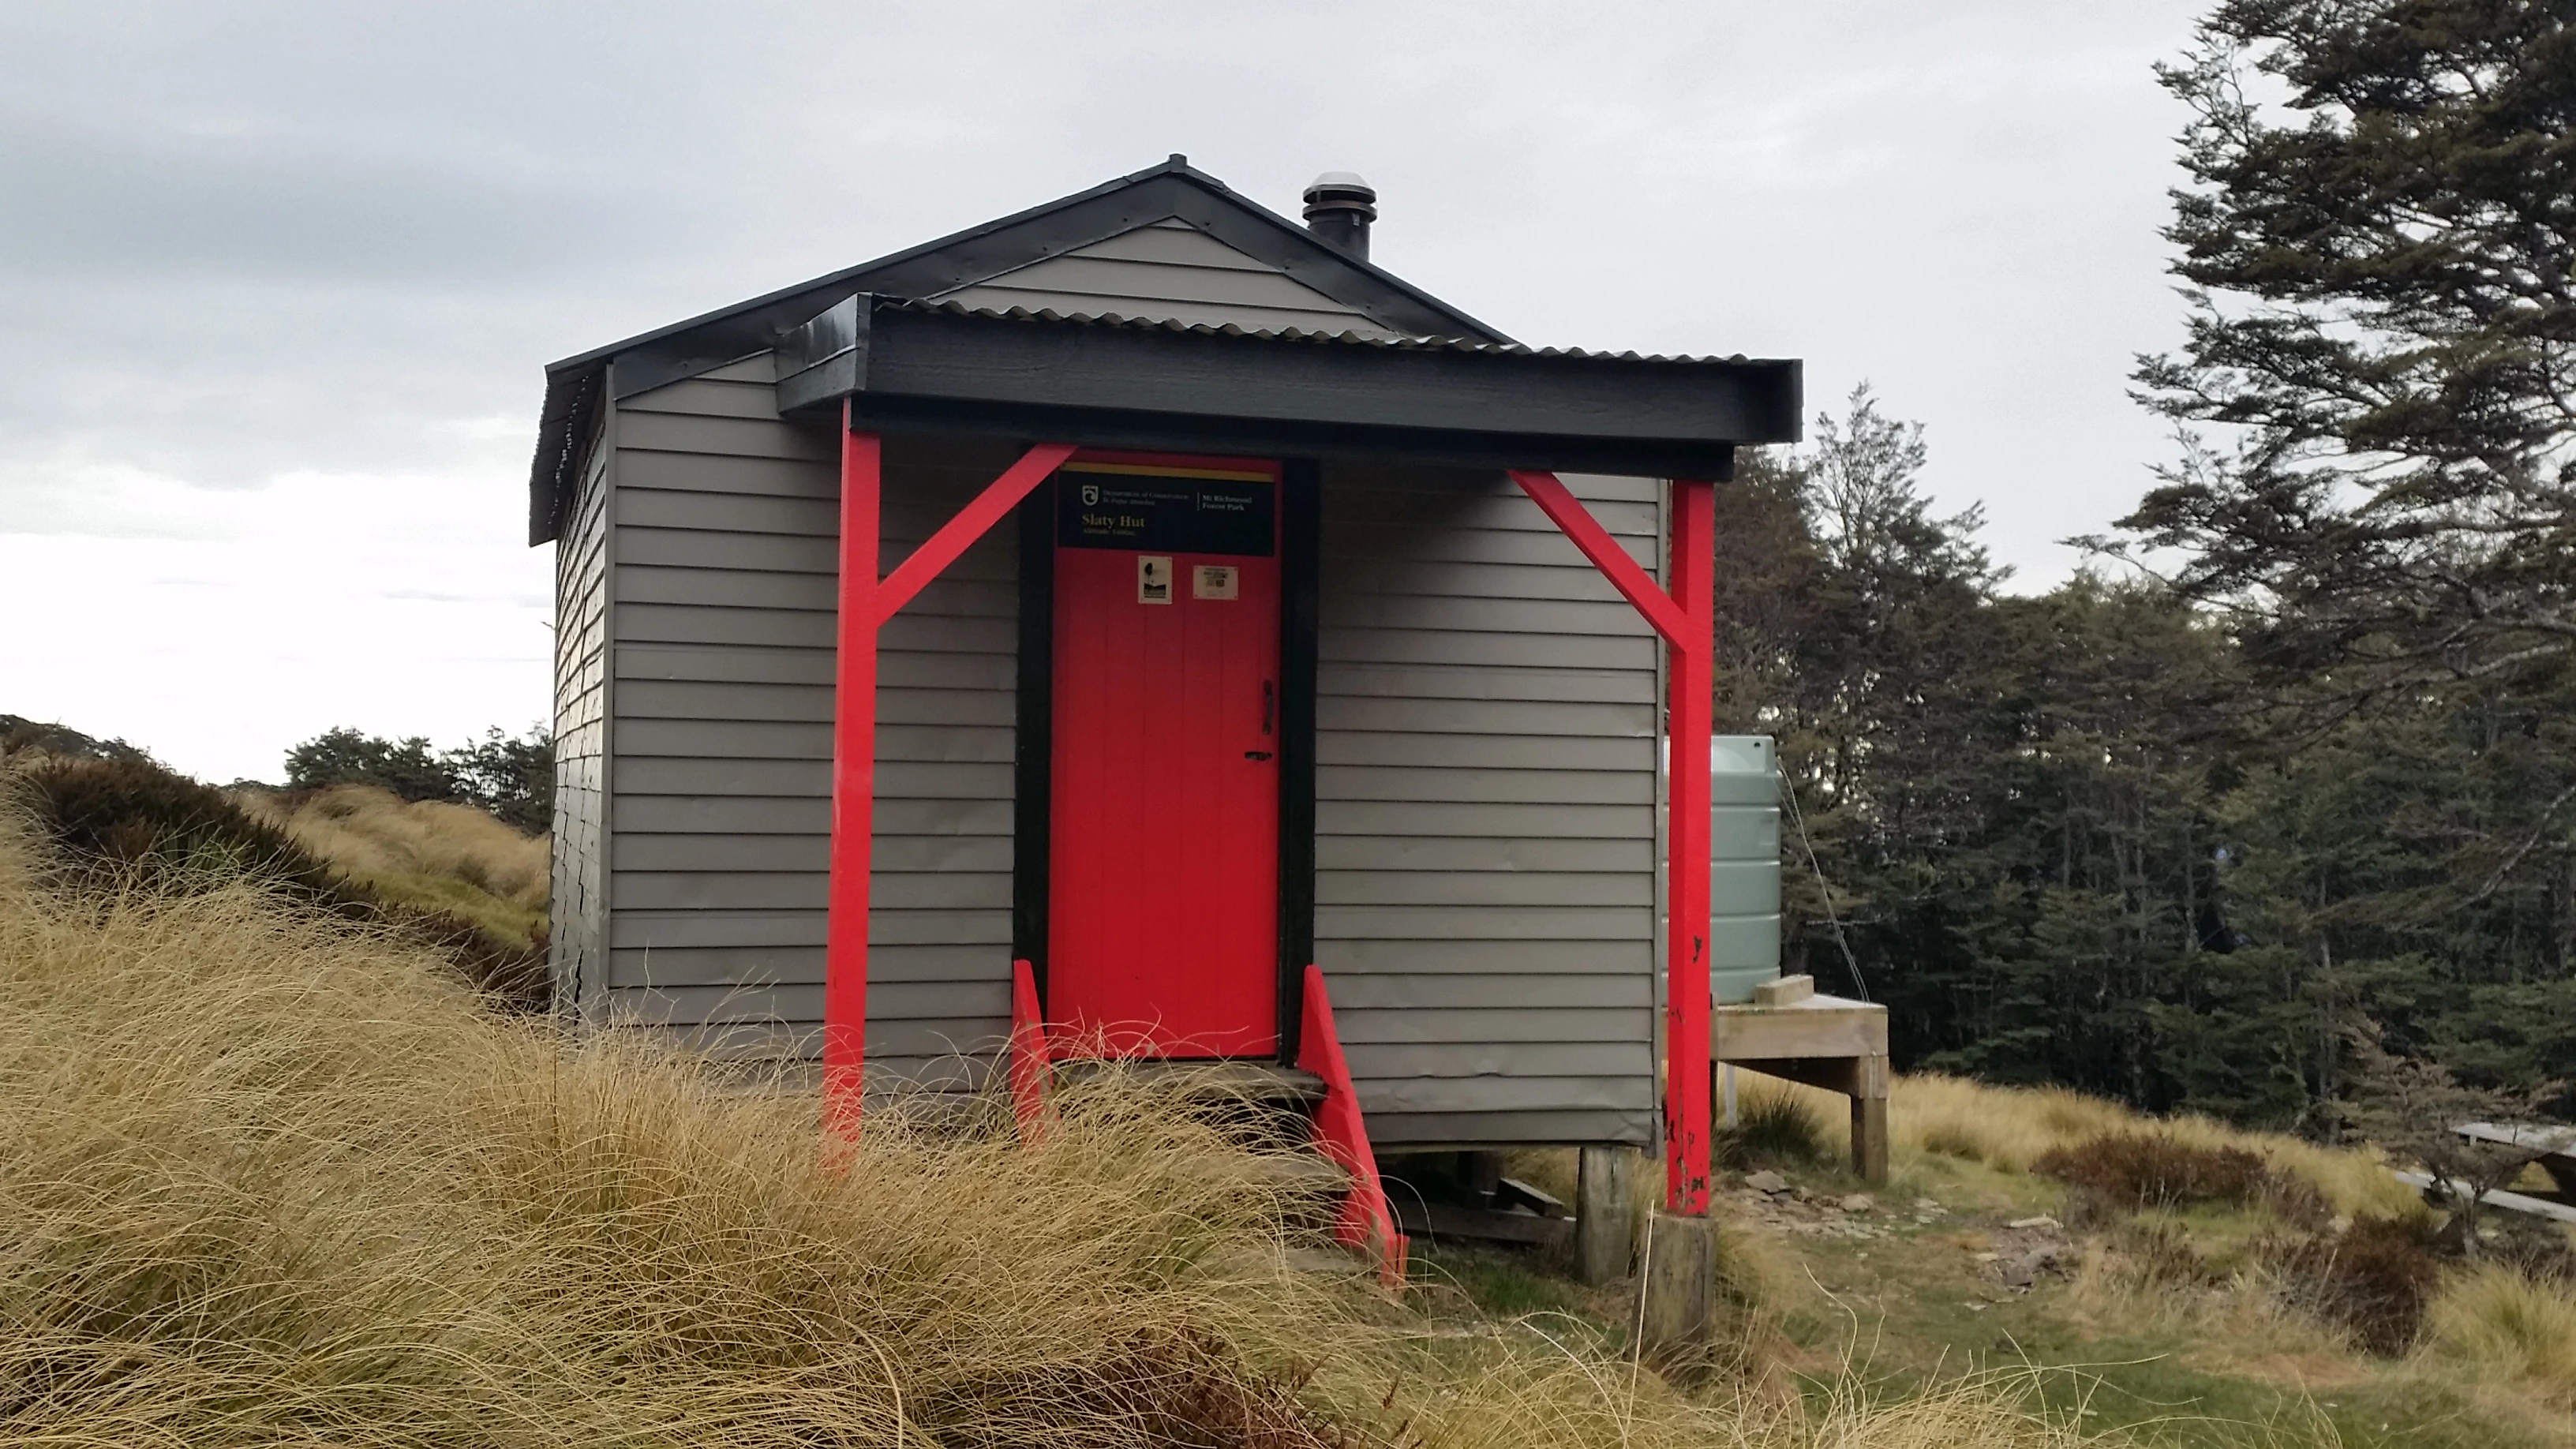 Slaty Hut is grey with a bright red feature door